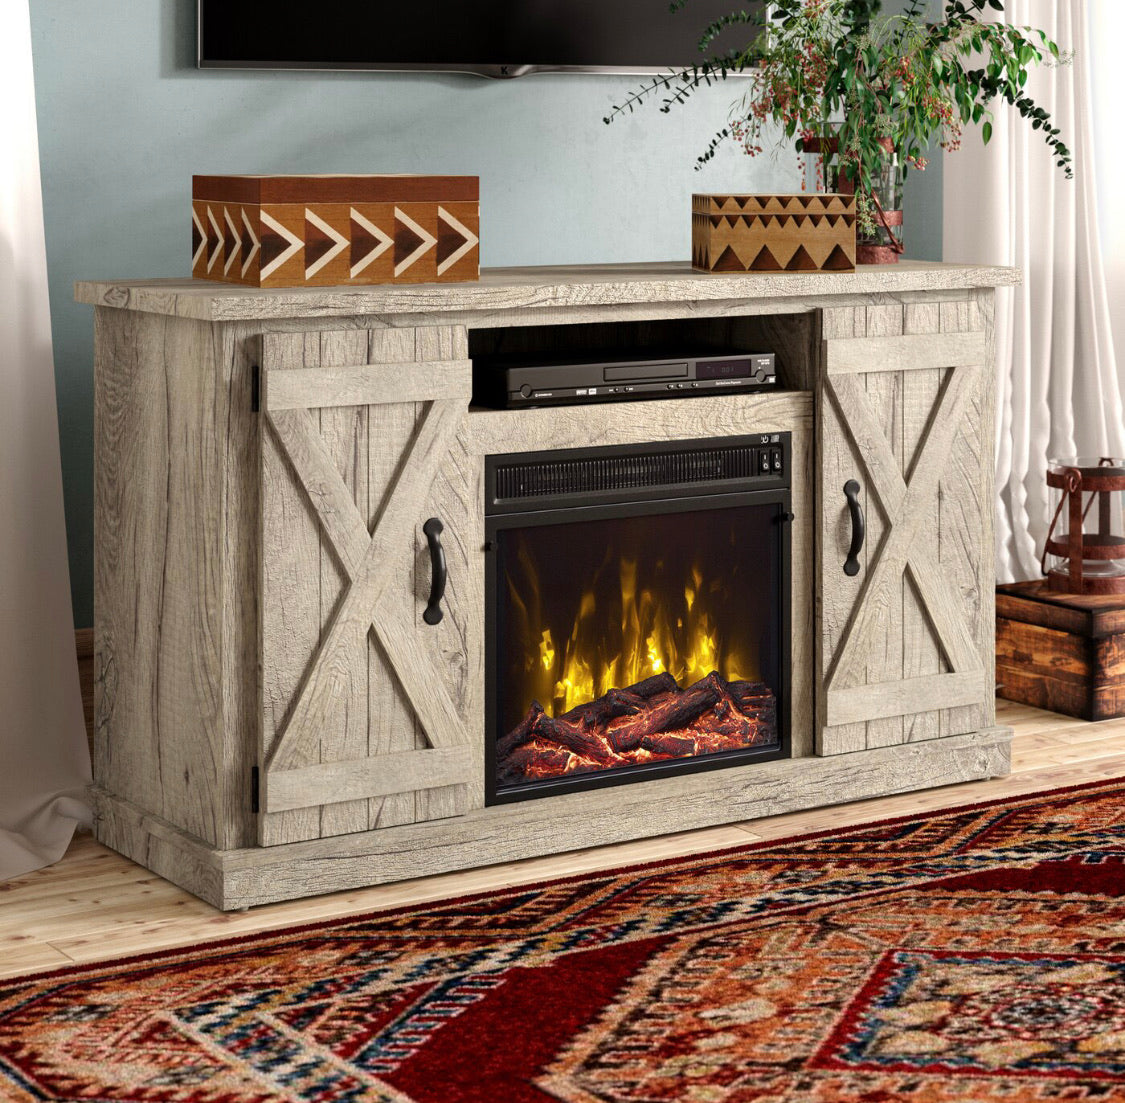 Lorraine TV Stand for TV’s up to 55” with electric fireplace #3134